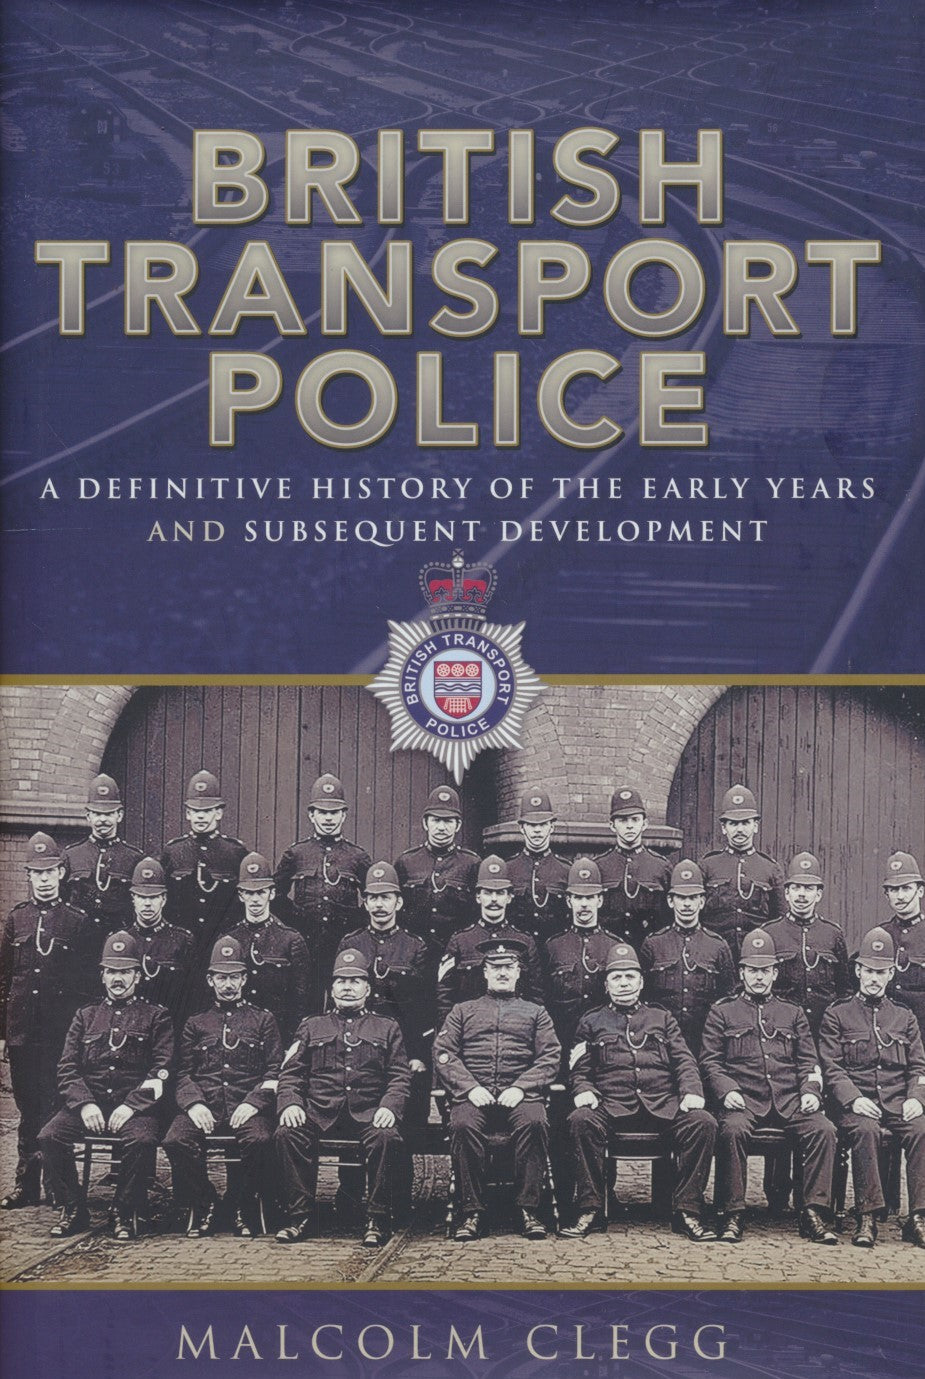 REDUCED British Transport Police - A definitive history of the early years and subsequent development